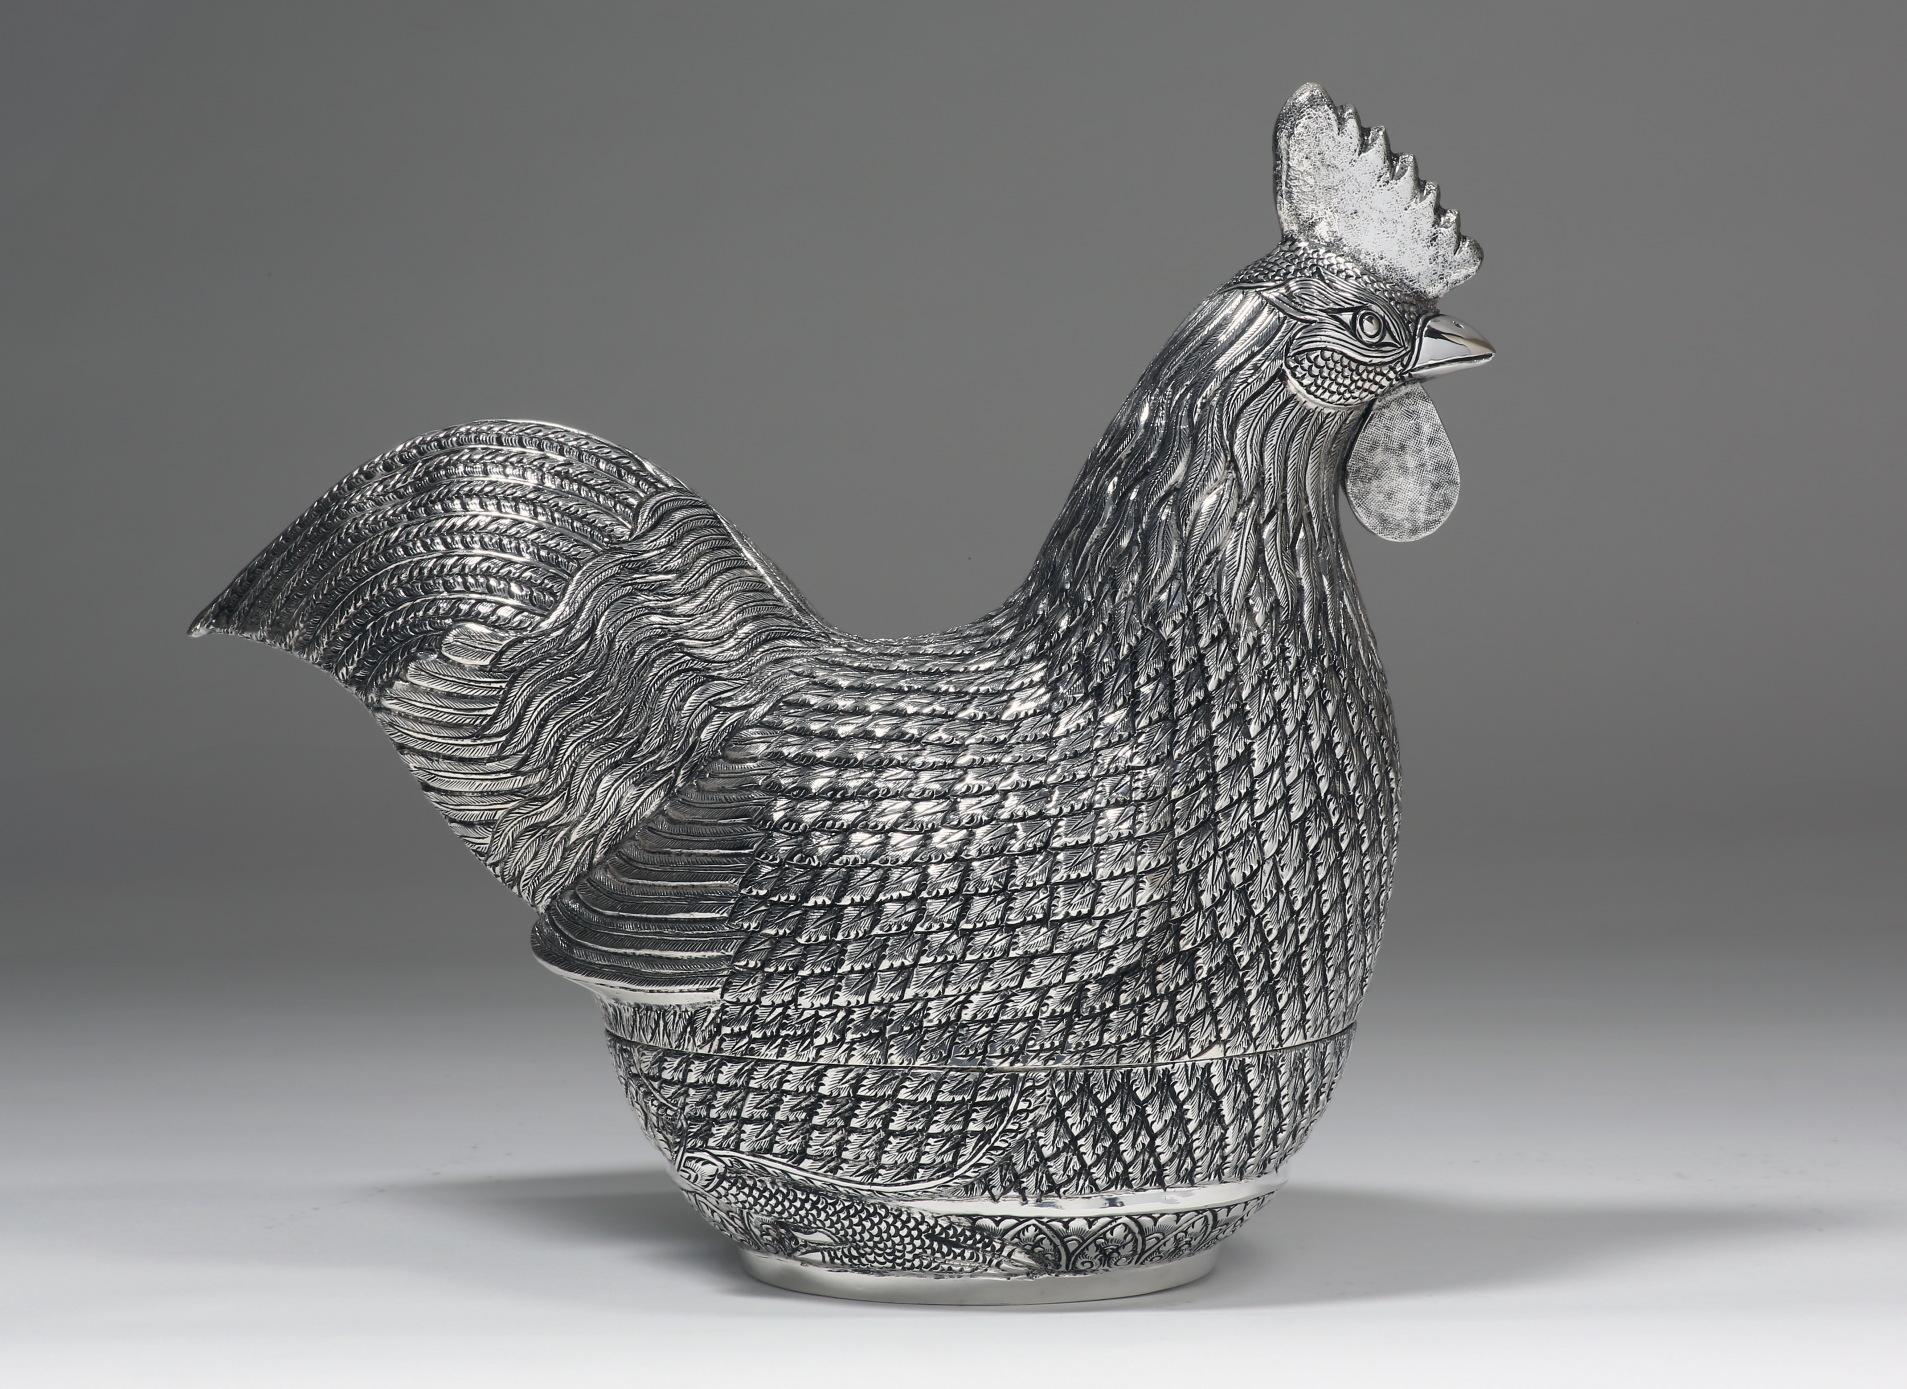 The contemporary solid silver rooster box is handcrafted by experienced silversmiths with fine techniques. Every feather on the rooster is vividly presented with details and textures. The rooster is designed to be opened for storage space.
A pair